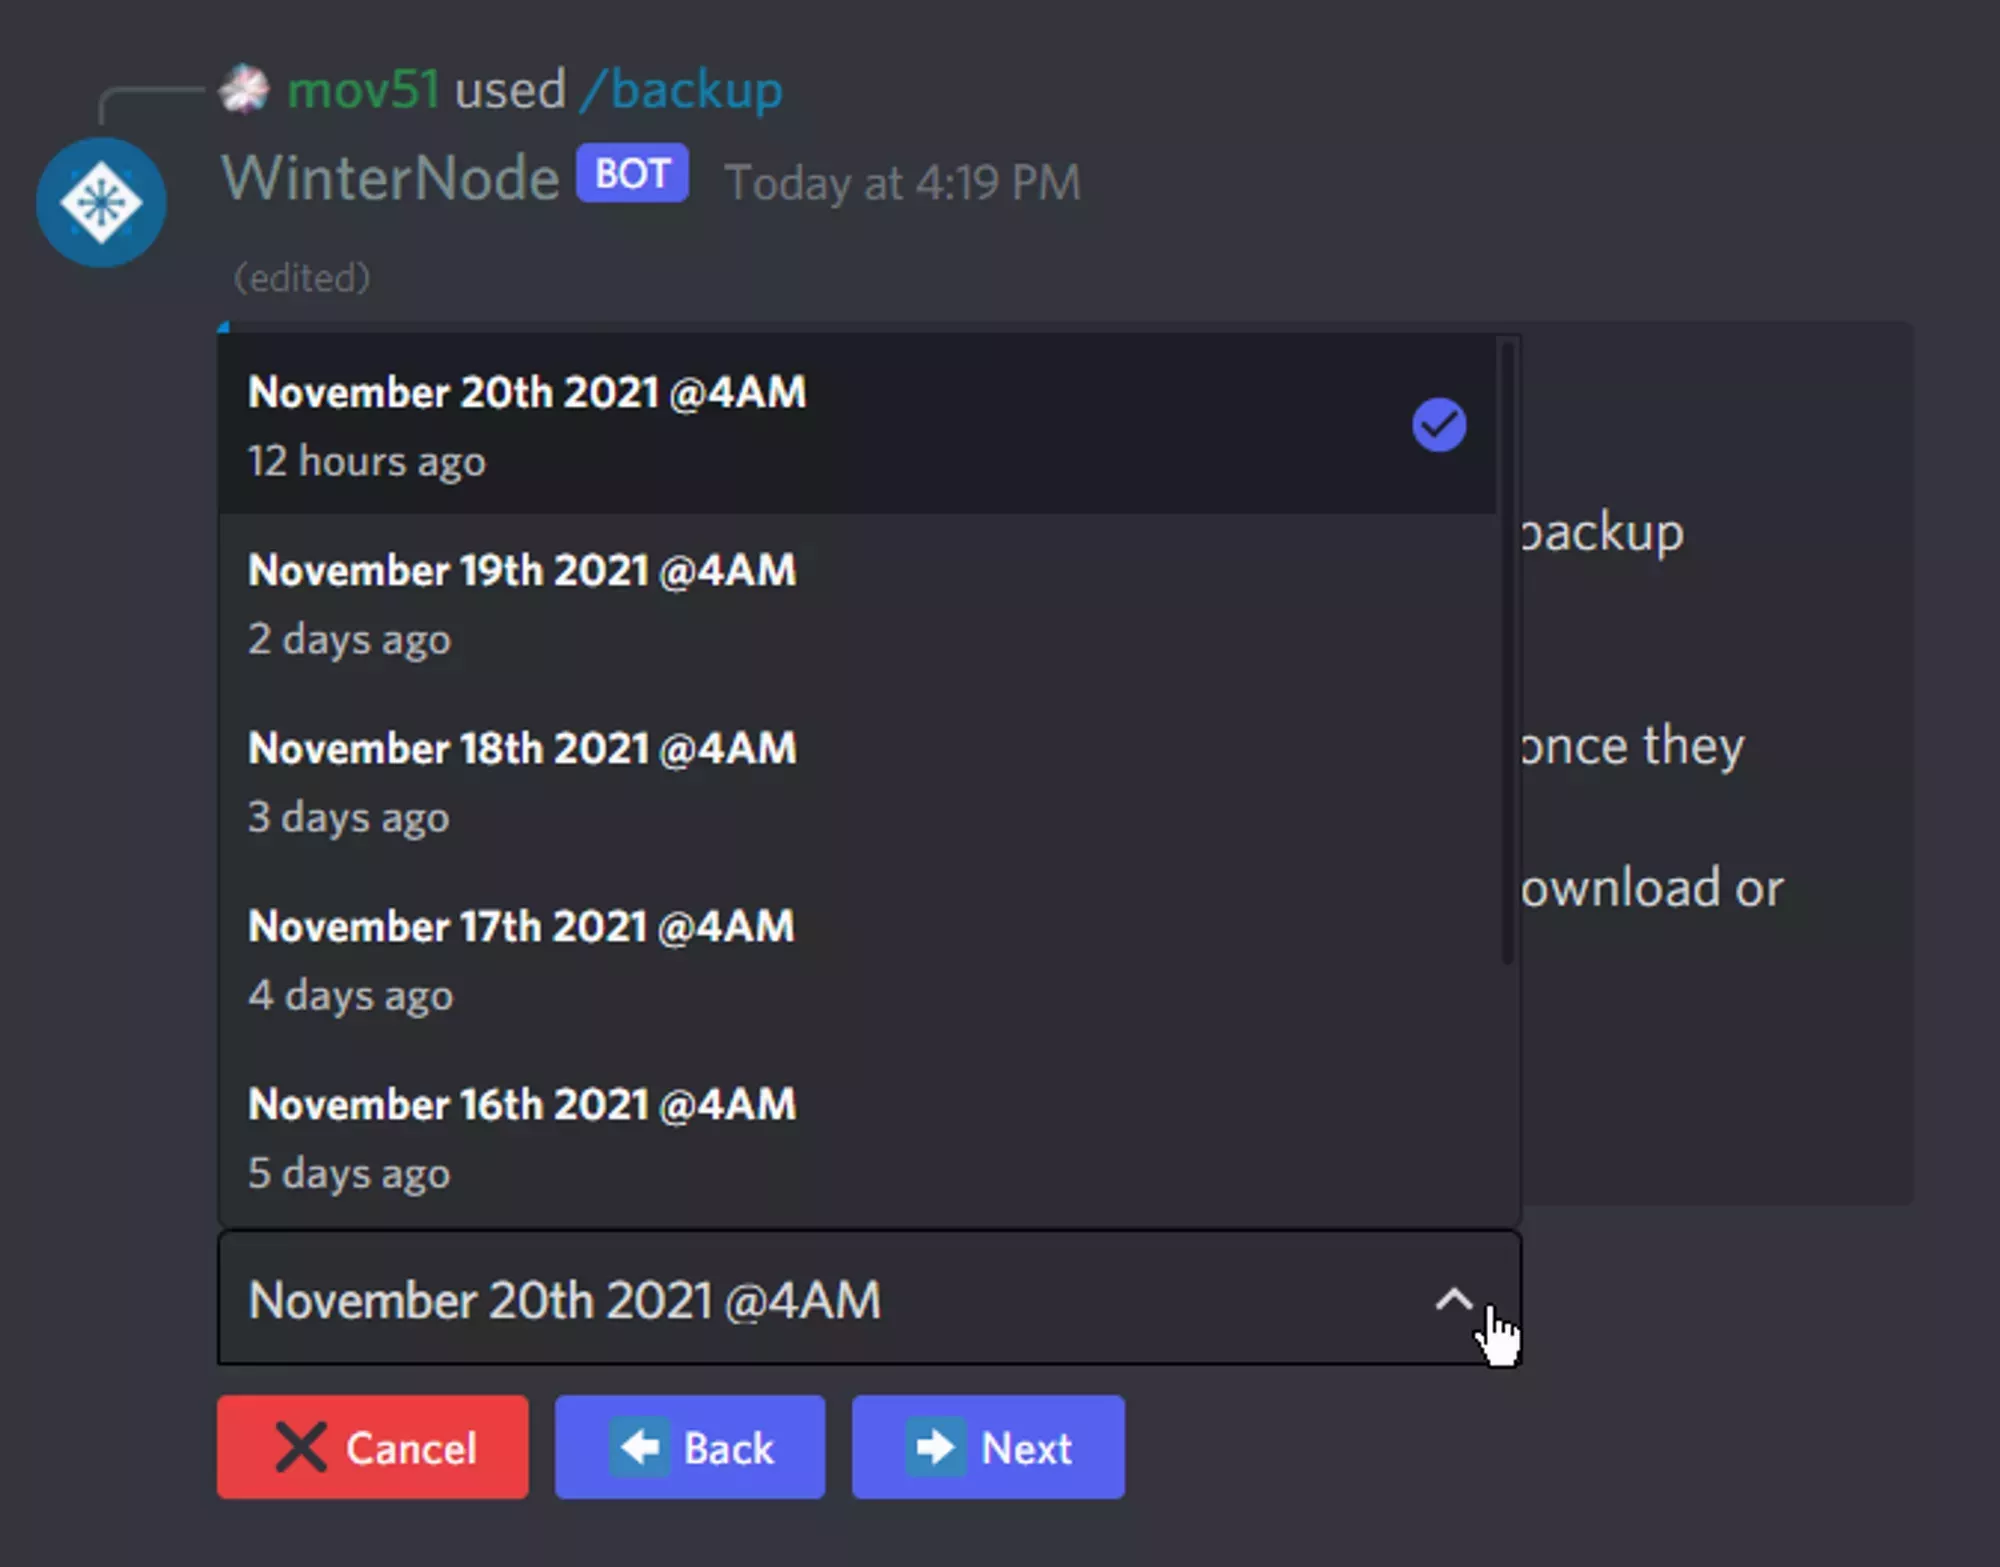 The WinterNode Bot&#39;s backup request form with the Date Dropdown open to display a list of recent dates